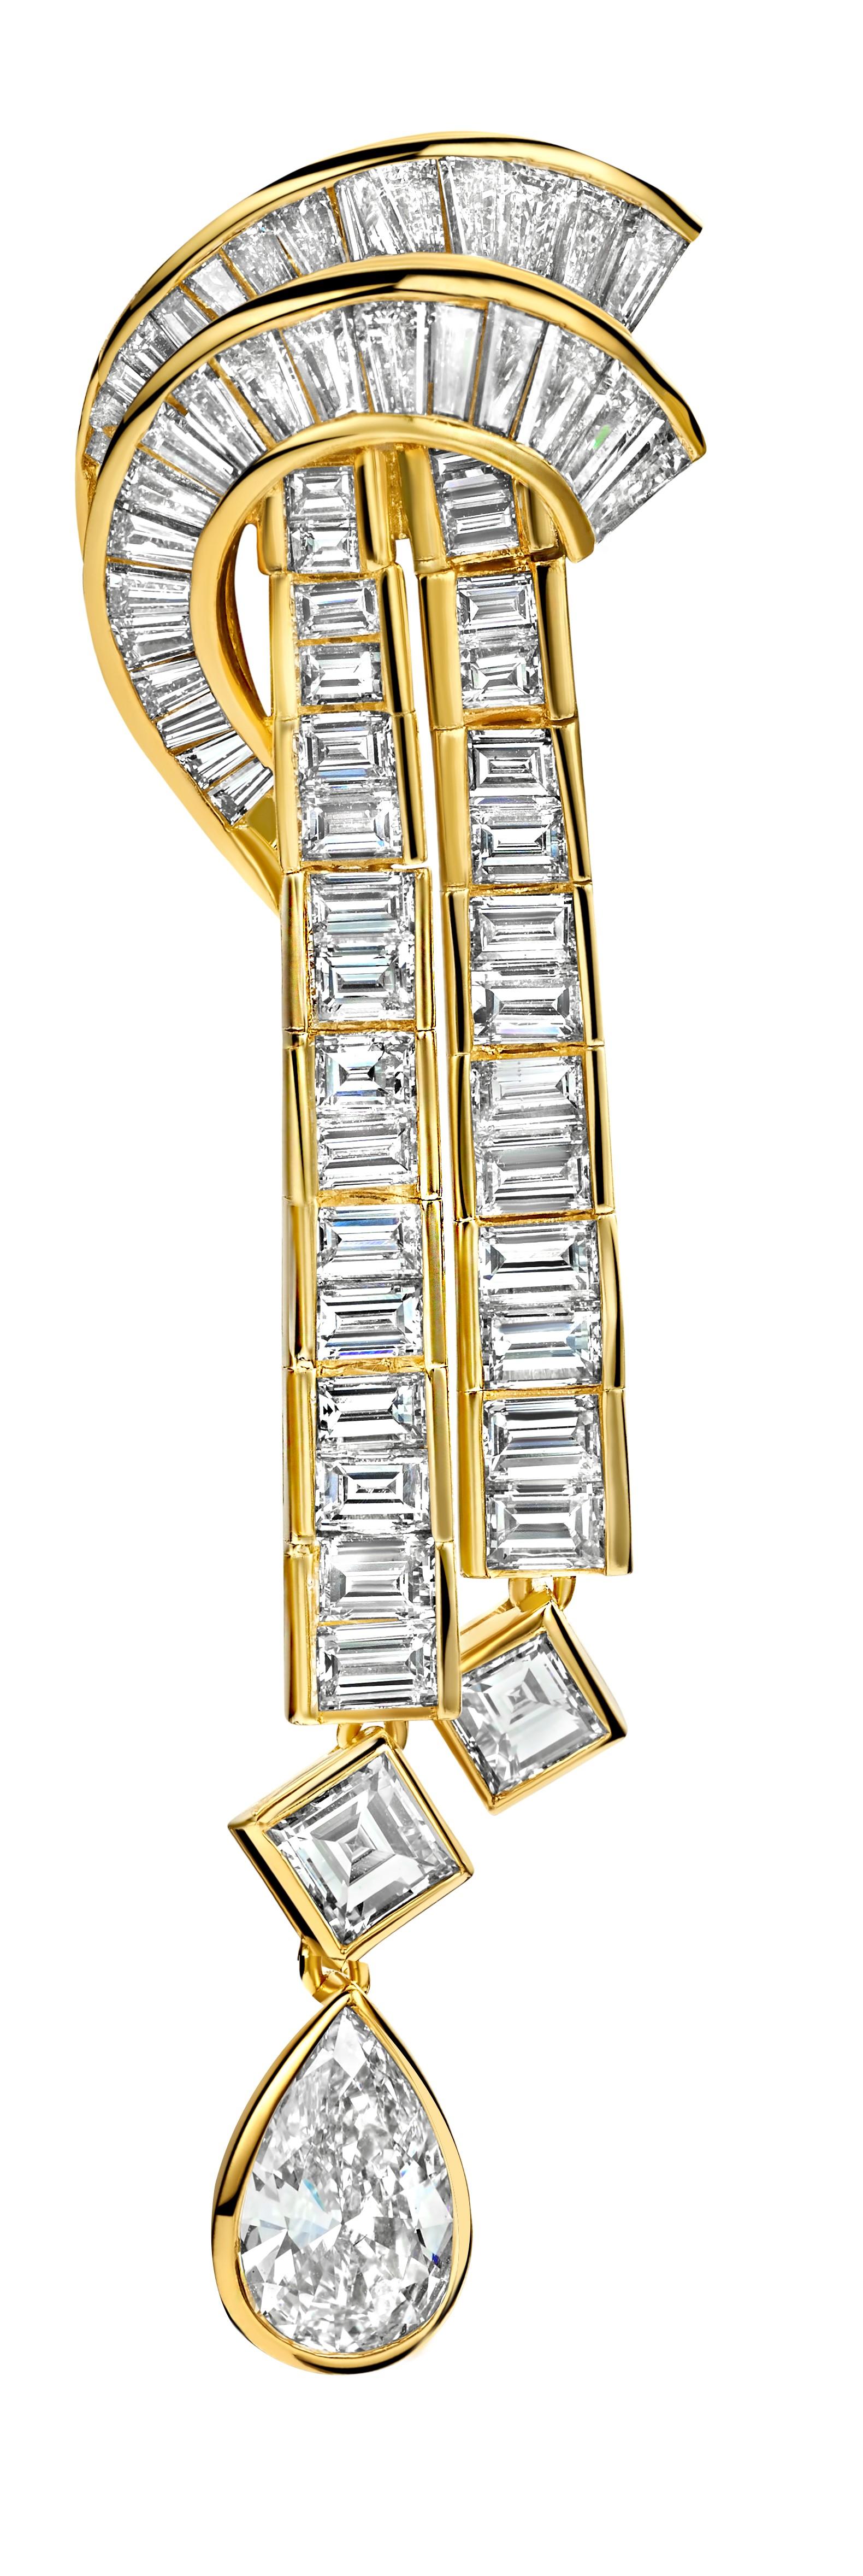 Gorgeous 18kt Yellow Gold Pair of earrings with 3ct Pear cut, 7.6 ct Baguette, 1.2ct Square cut Diamond ,  Estate His Majesty The Sultan Of Oman Qaboos Bin Said

Diamonds:
Baguette cut diamond, together approx. 7.6 ct. 
Square cut diamonds together